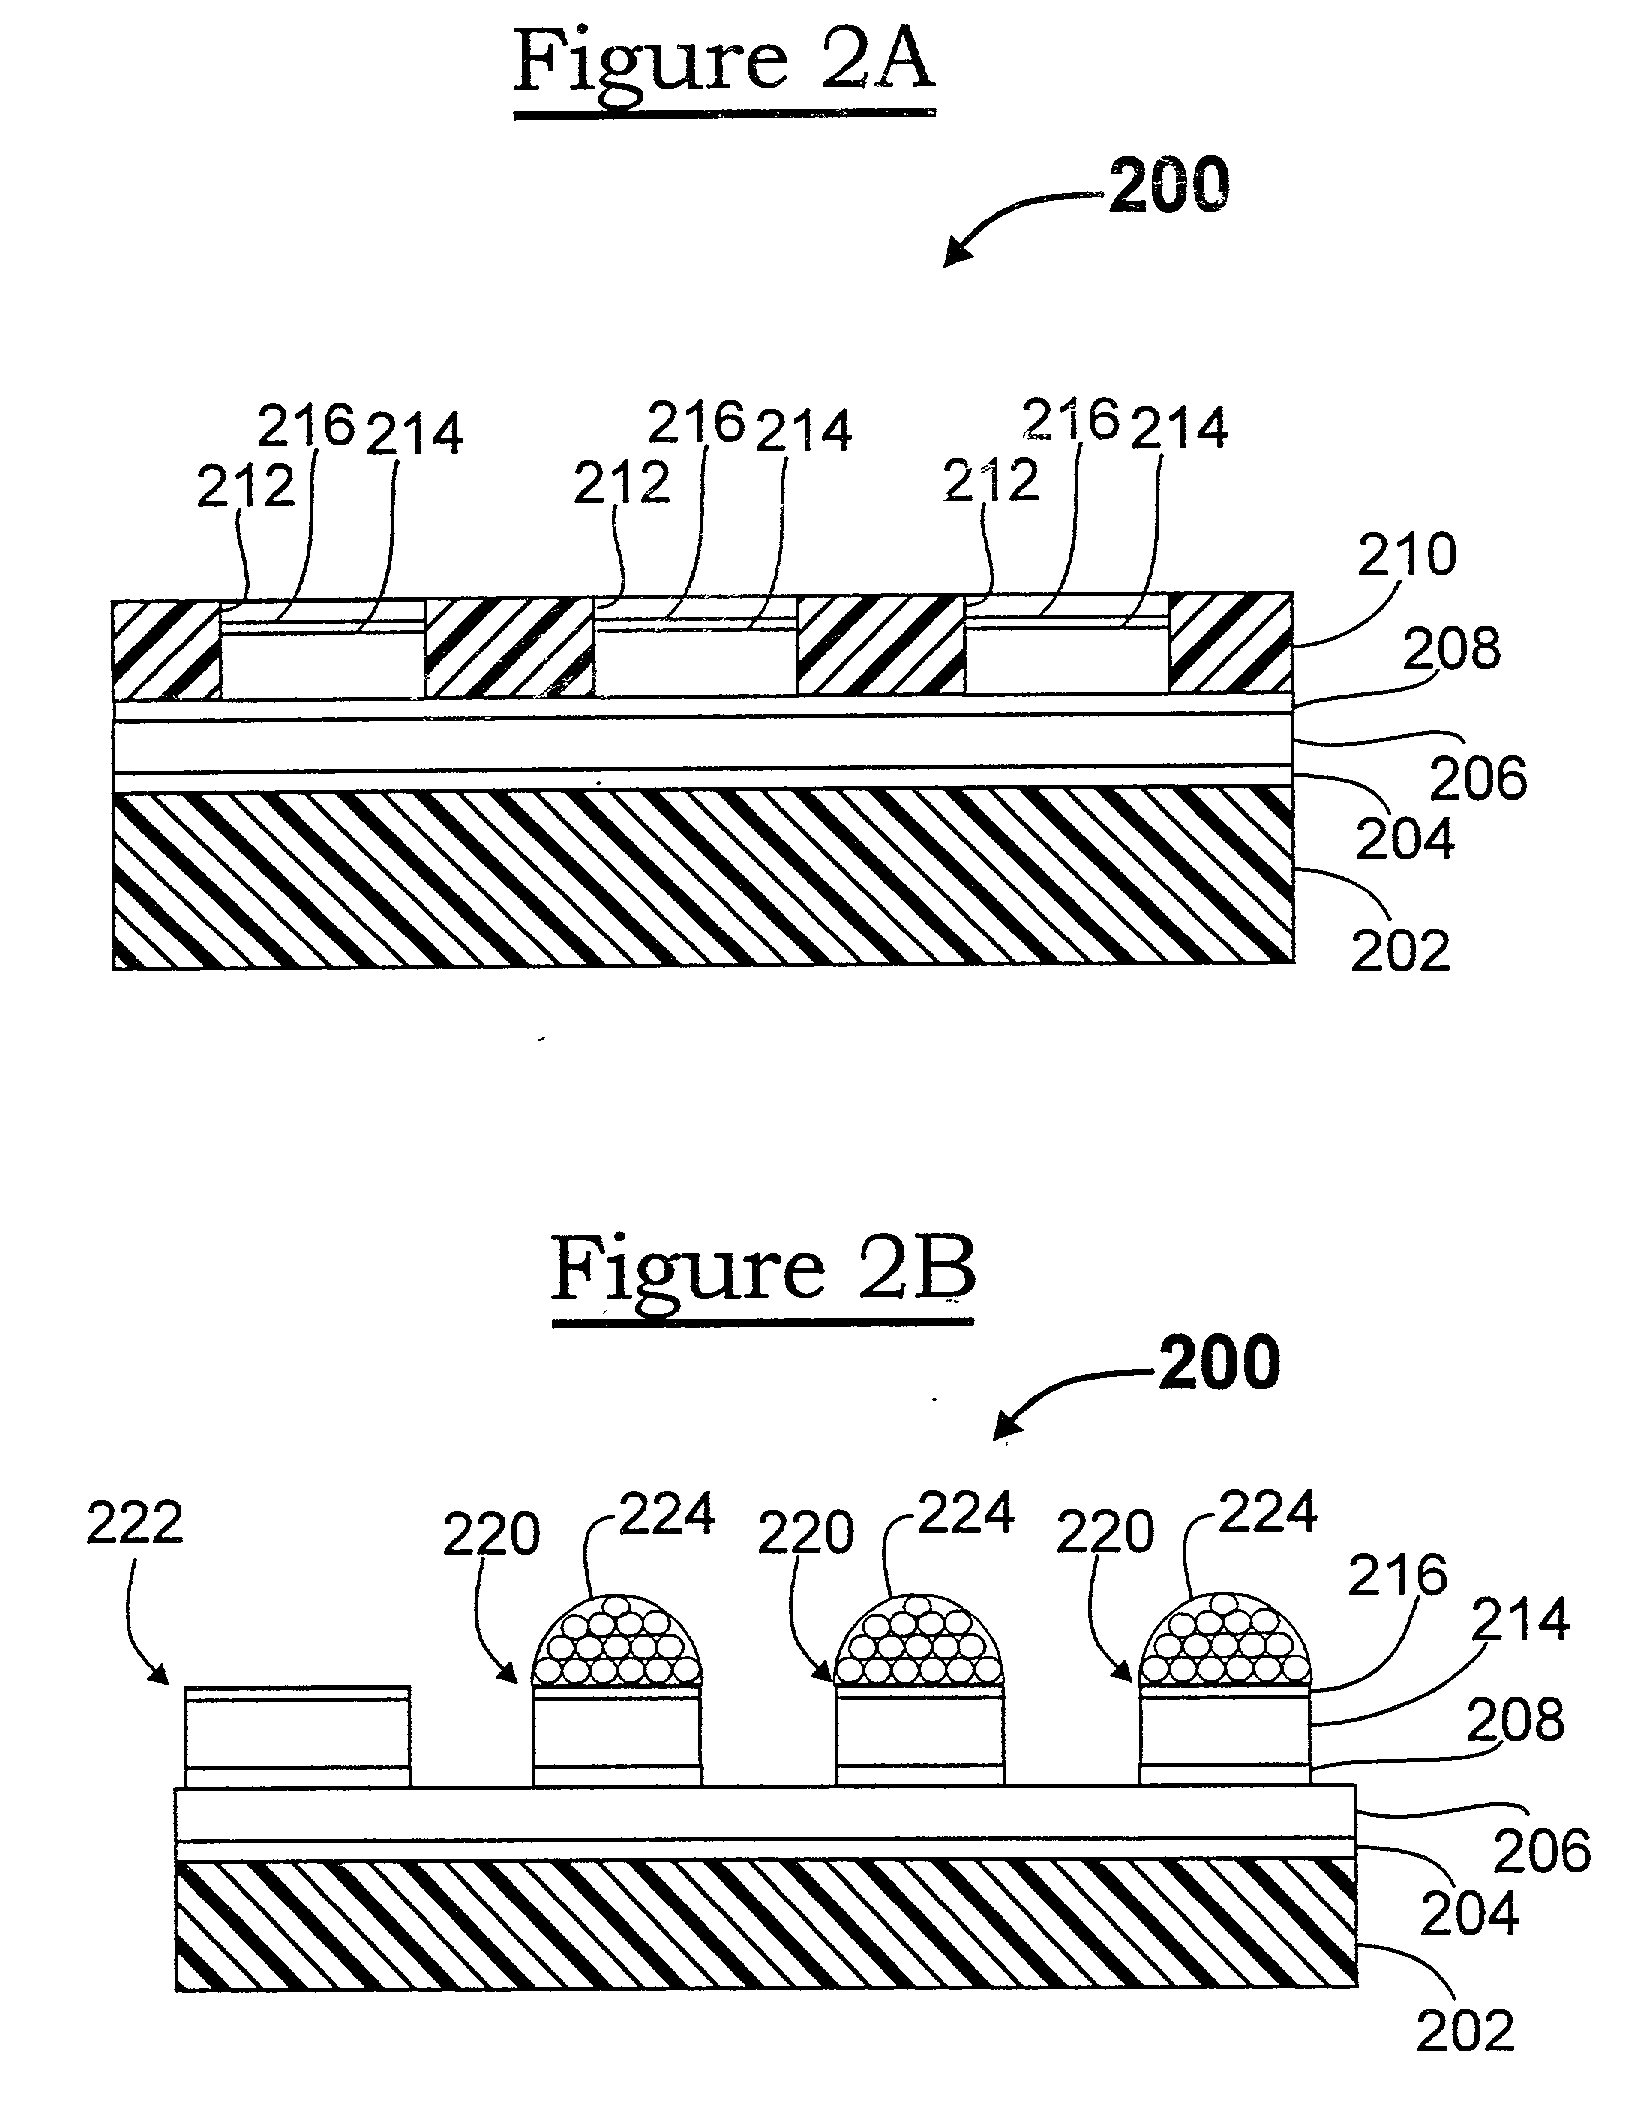 Contact tip structure for microelectronic interconnection elements and method of making same